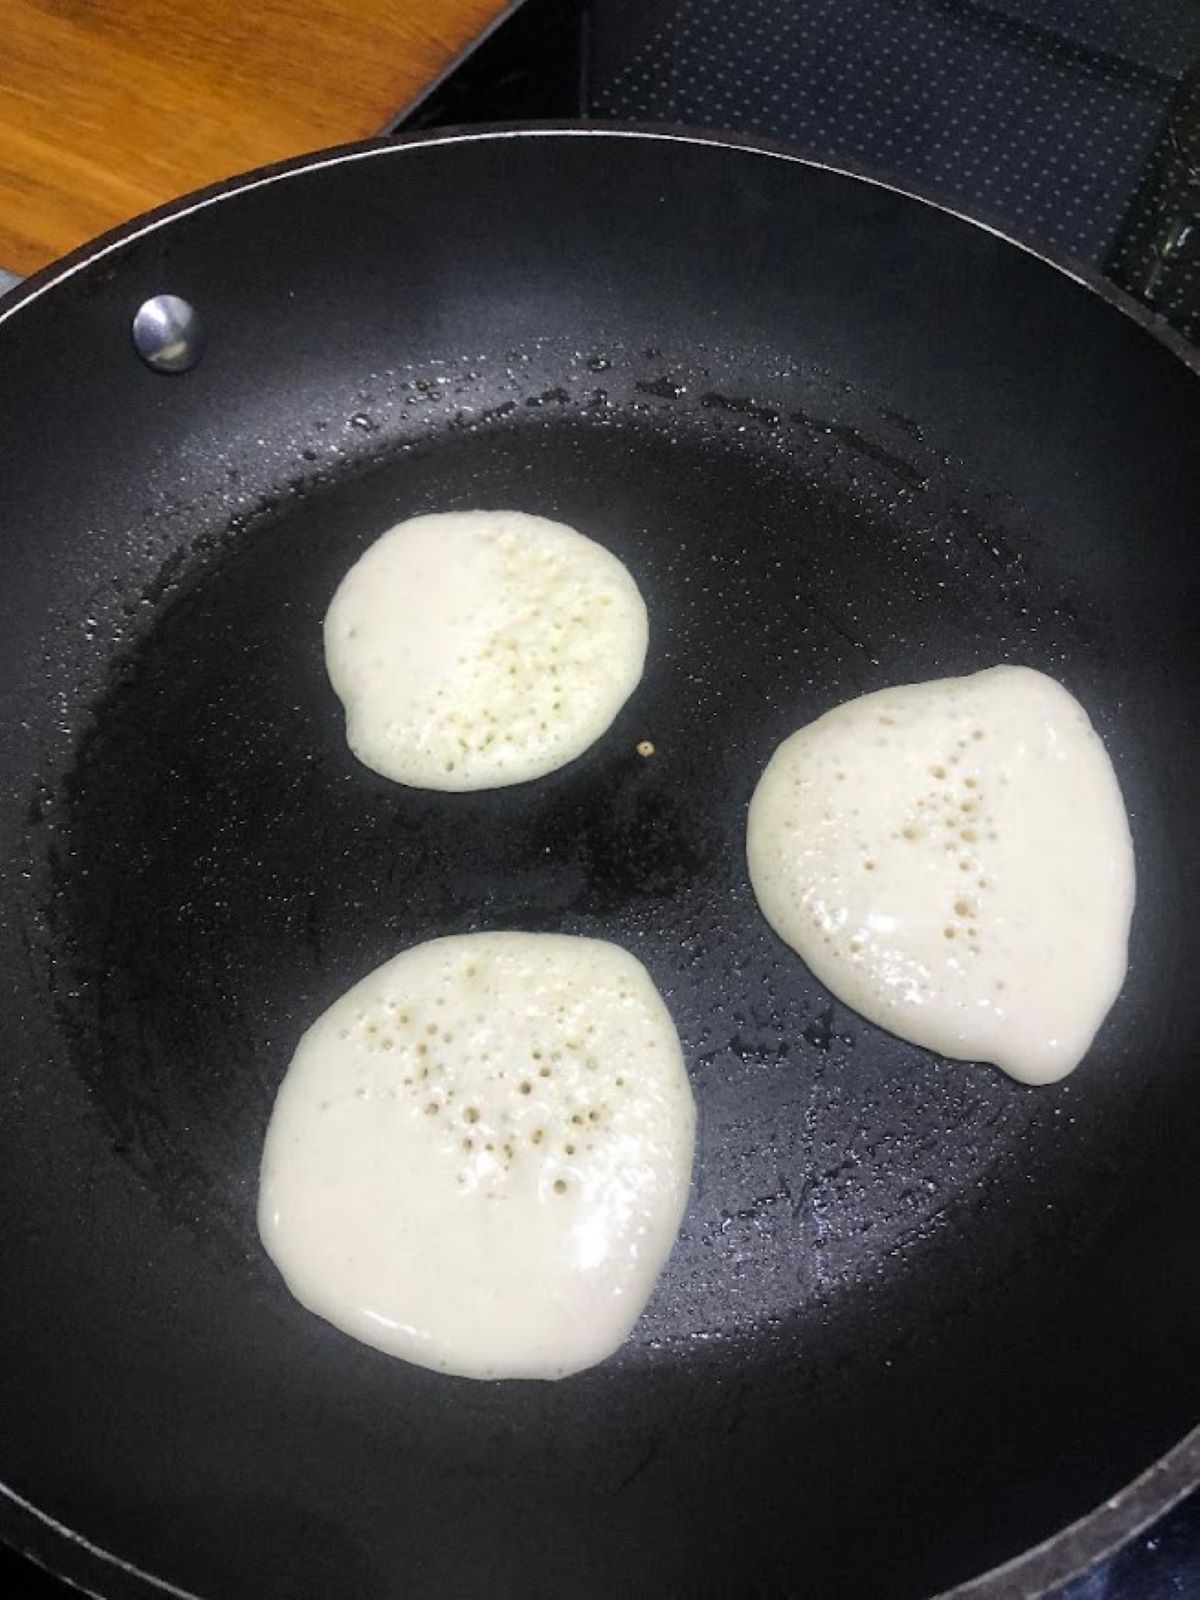 Dutch mini pancakes being cooked in a non stick pan ready for flipping over